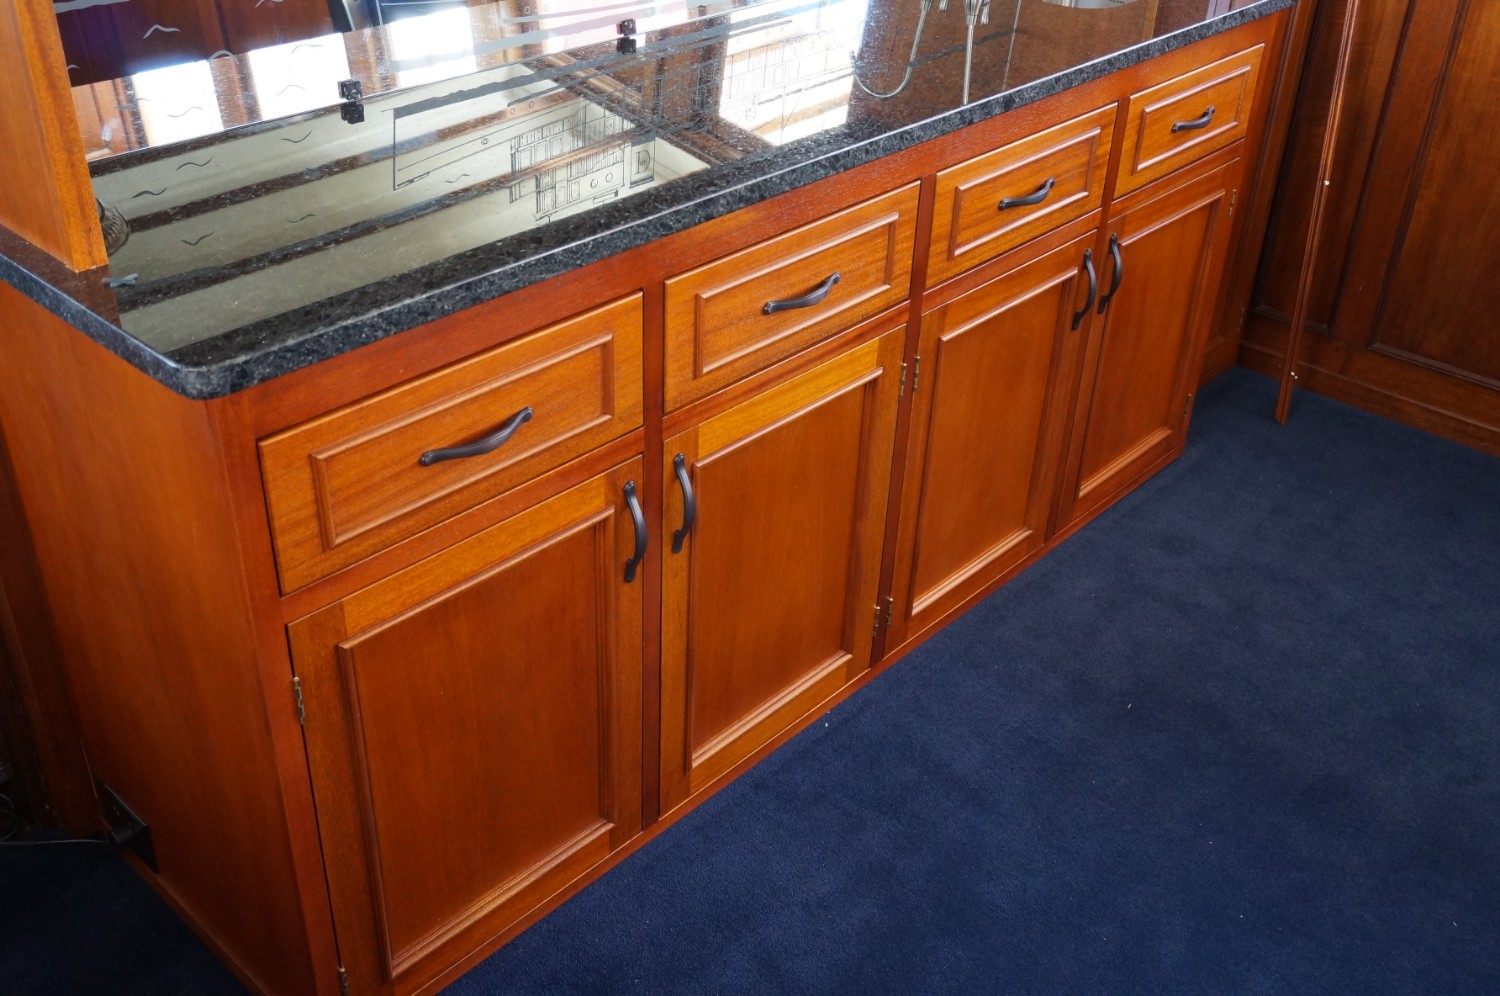 Lower cabinets detail on buffet